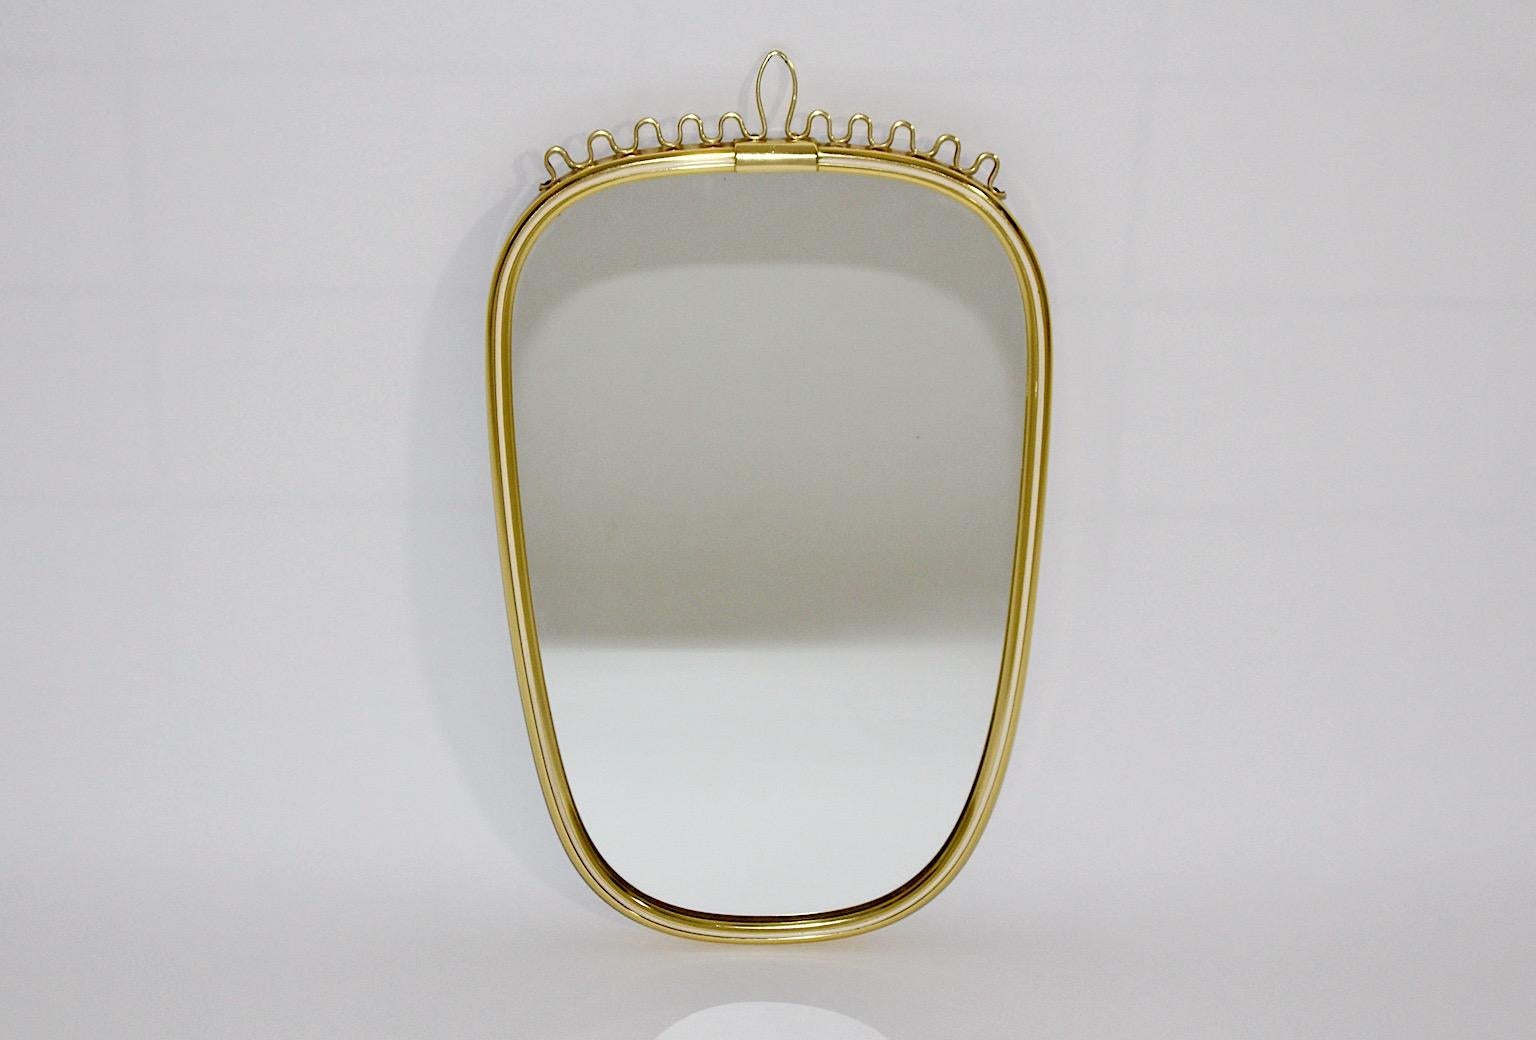 Mid-20th Century Mid-Century Modern Vintage Brass Oval Wall Mirror, 1960s, Germany For Sale